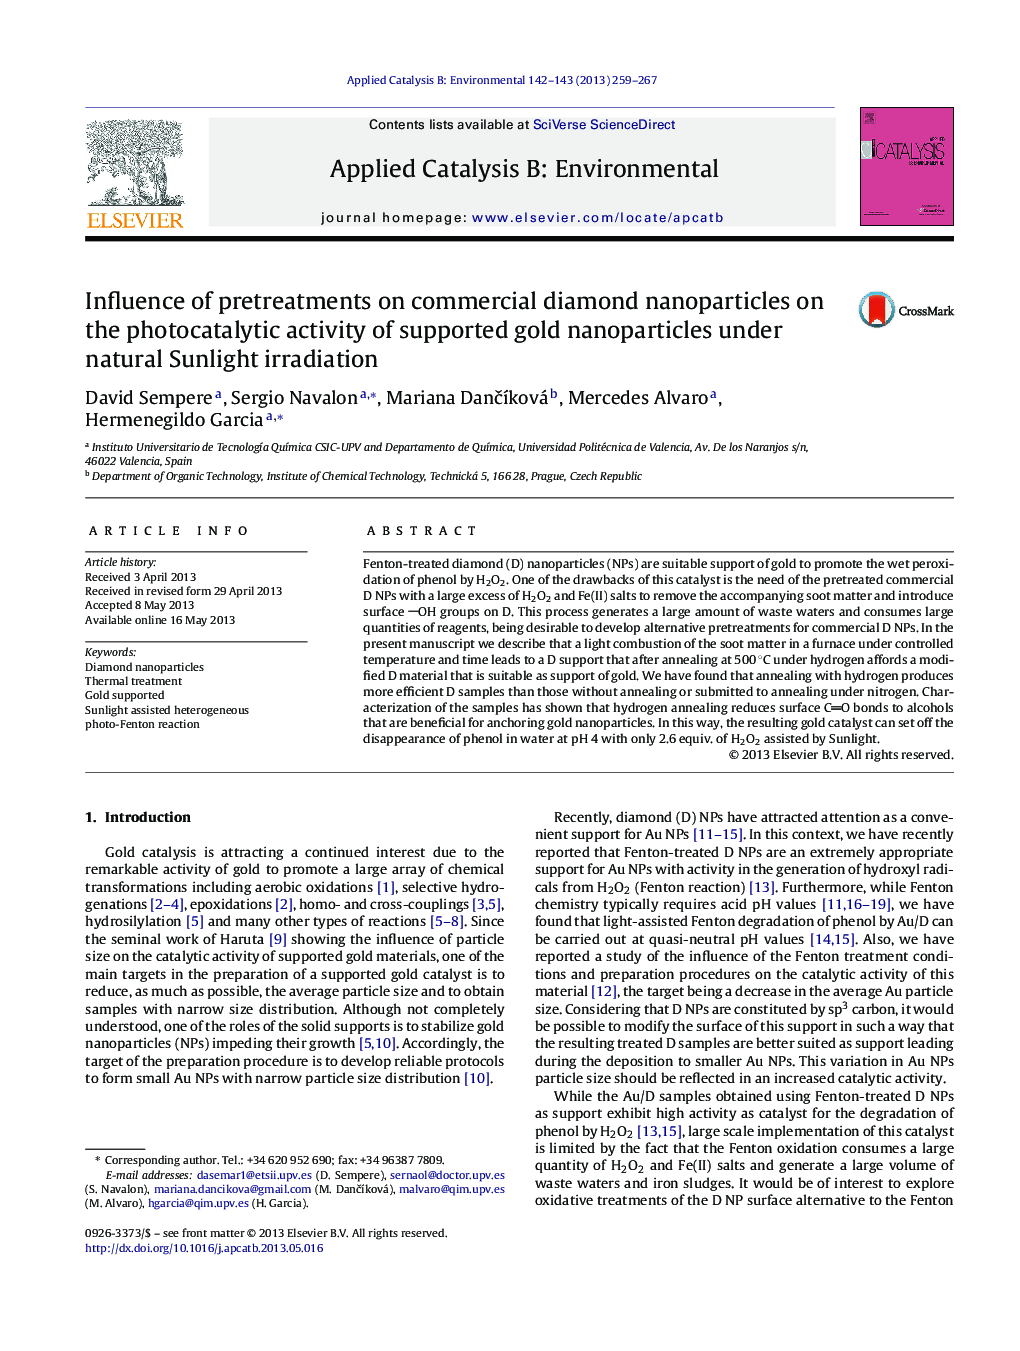 Influence of pretreatments on commercial diamond nanoparticles on the photocatalytic activity of supported gold nanoparticles under natural Sunlight irradiation